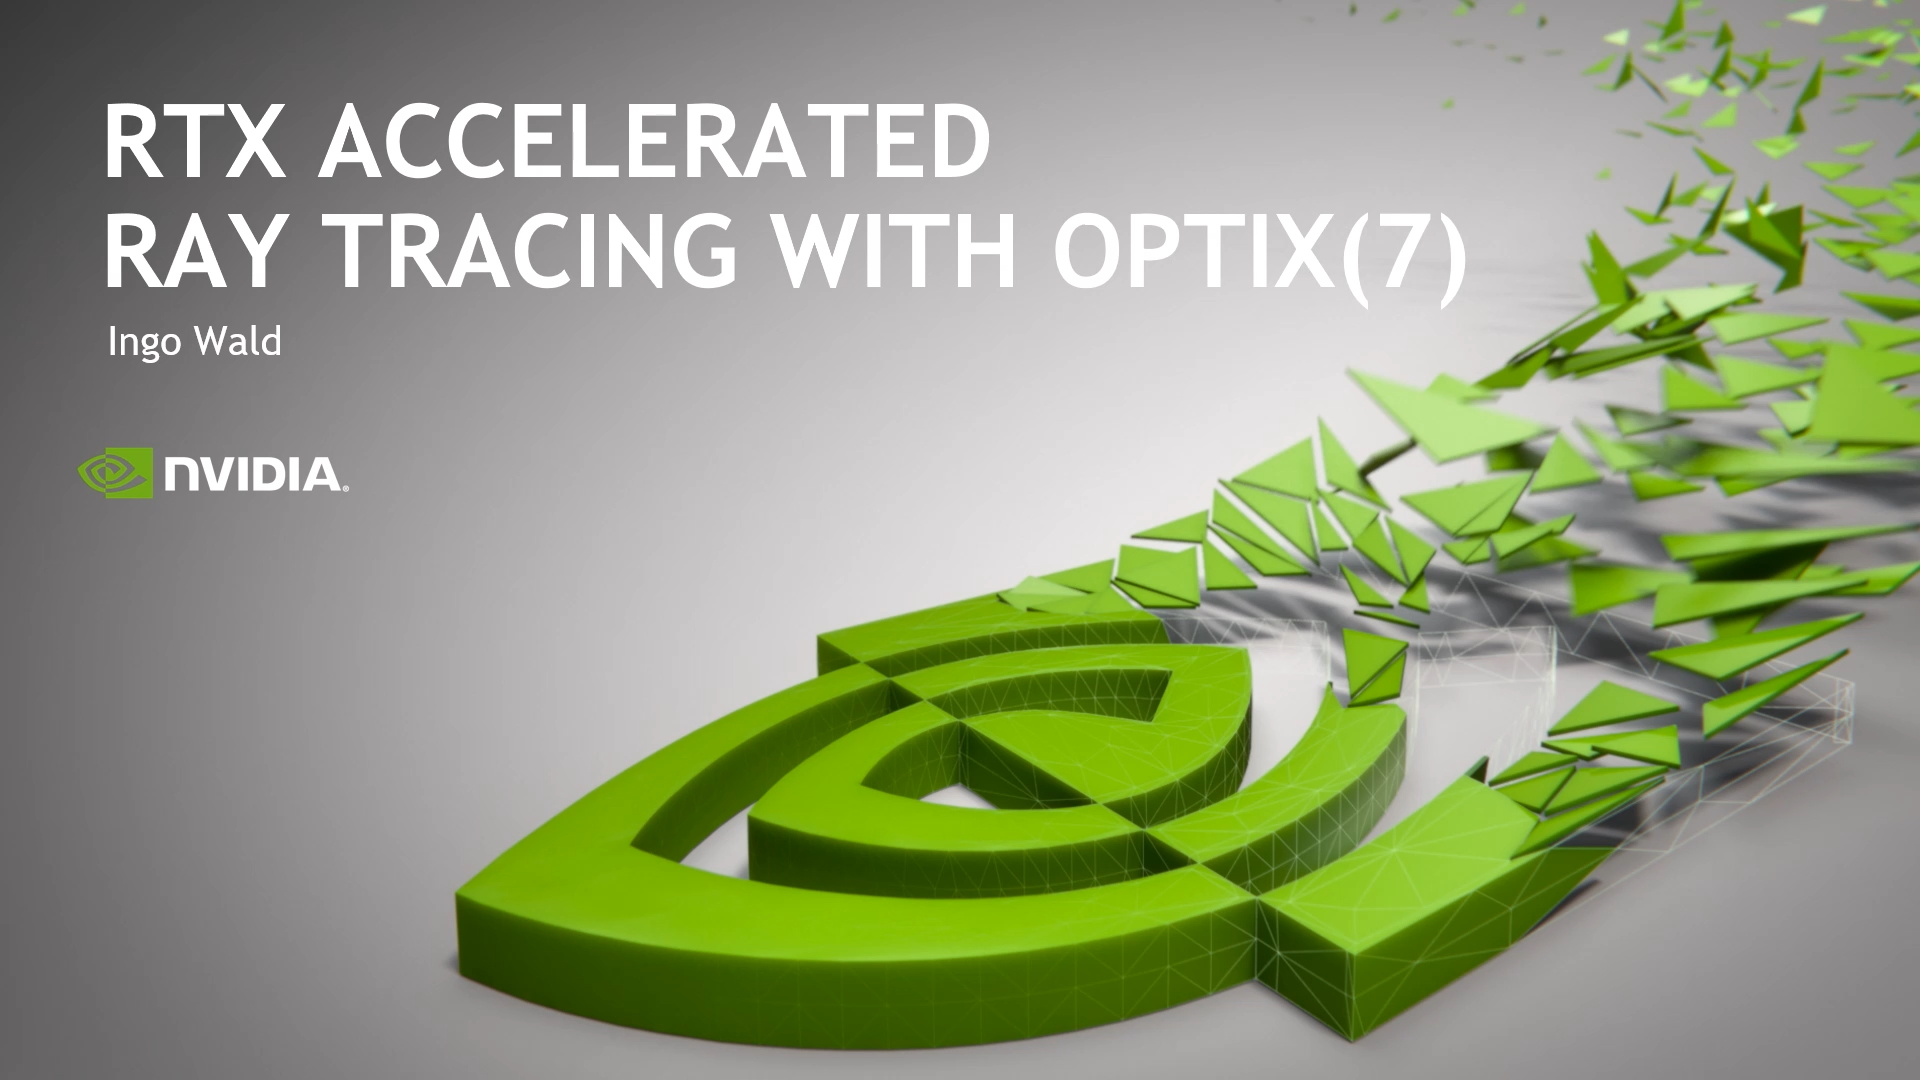 See the future of real-time ray tracing in this new Project Lavina